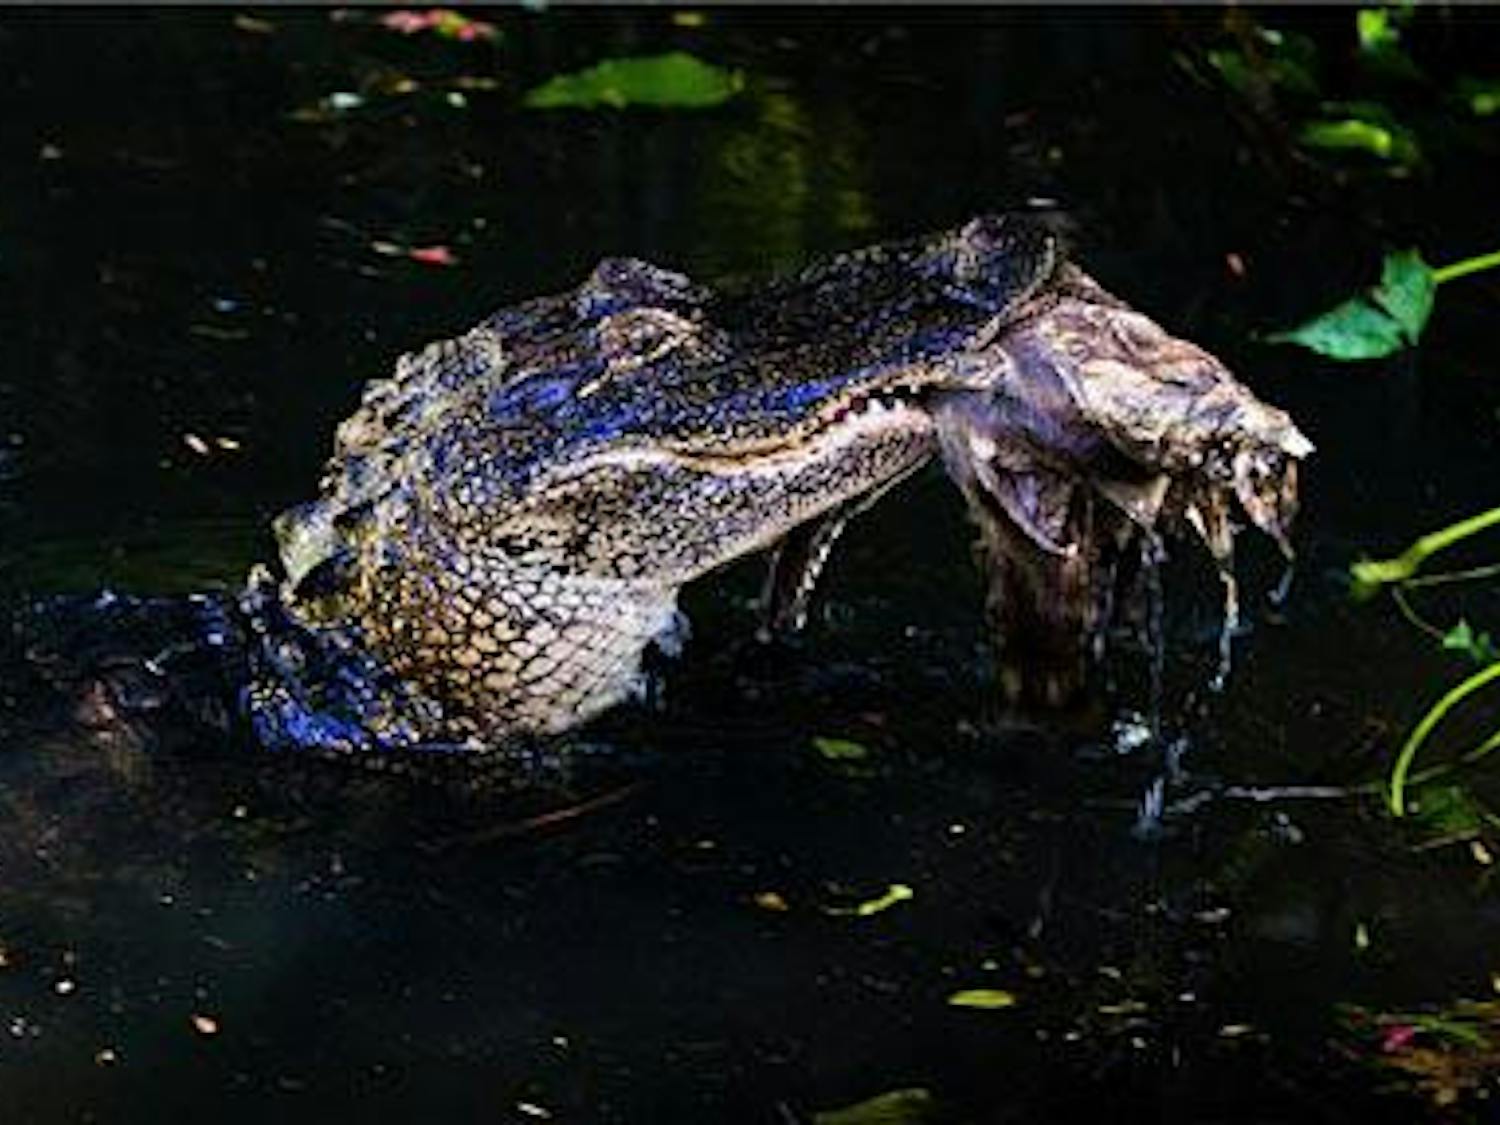 An alligator in Graham Area Pond, nicknamed "Ricky Bobby" by UF student Breenna Rossman, surfaces with its dinner. Though outnumbered by humans in the surrounding dorms, the alligator's pond is a protected habitat.